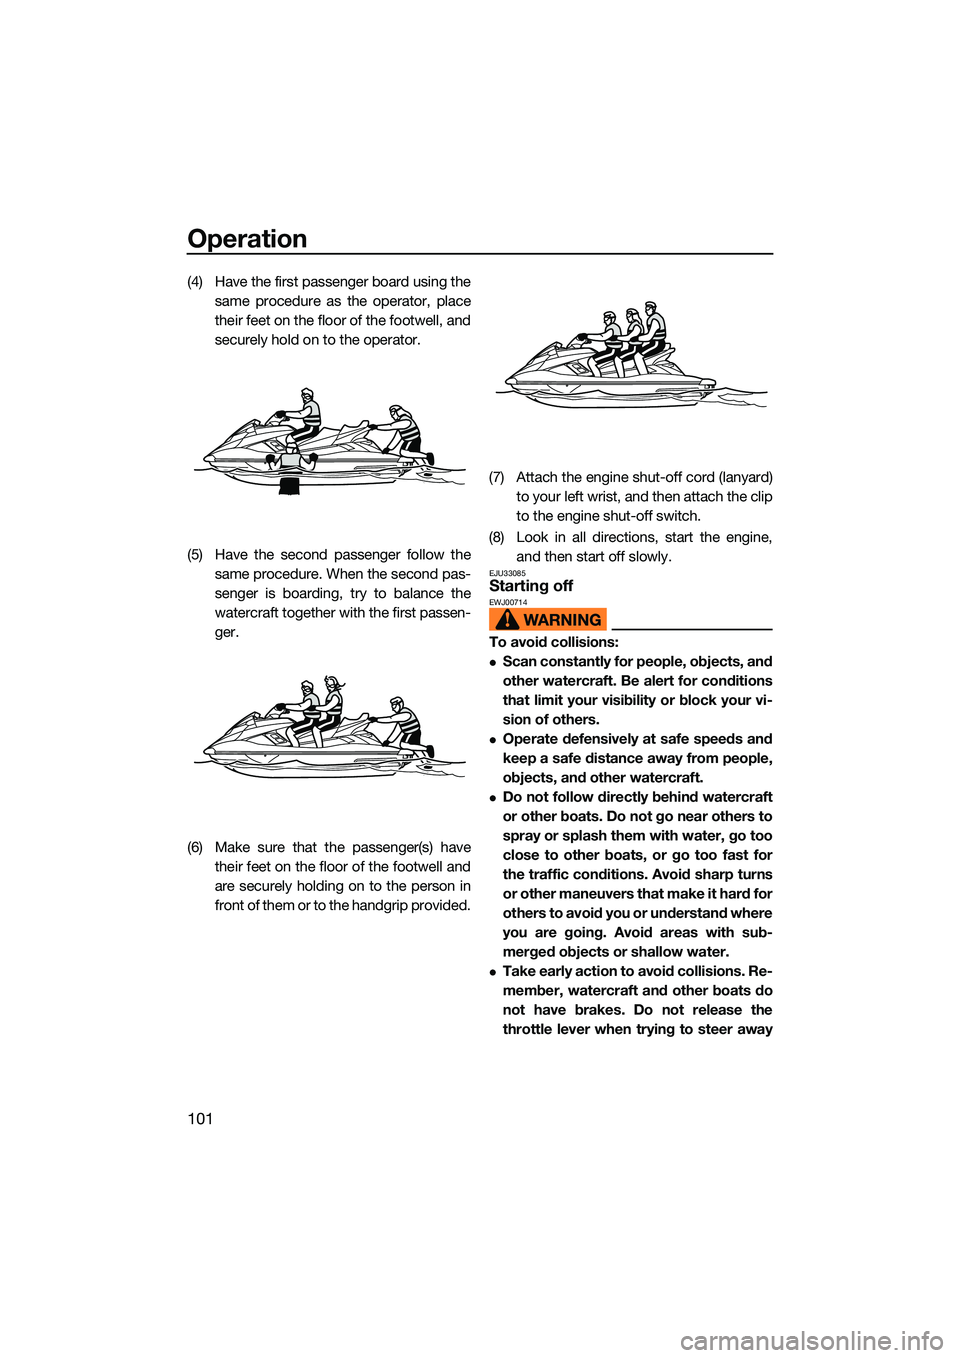 YAMAHA FX HO CRUISER 2022  Owners Manual Operation
101
(4) Have the first passenger board using thesame procedure as the operator, place
their feet on the floor of the footwell, and
securely hold on to the operator.
(5) Have the second passe